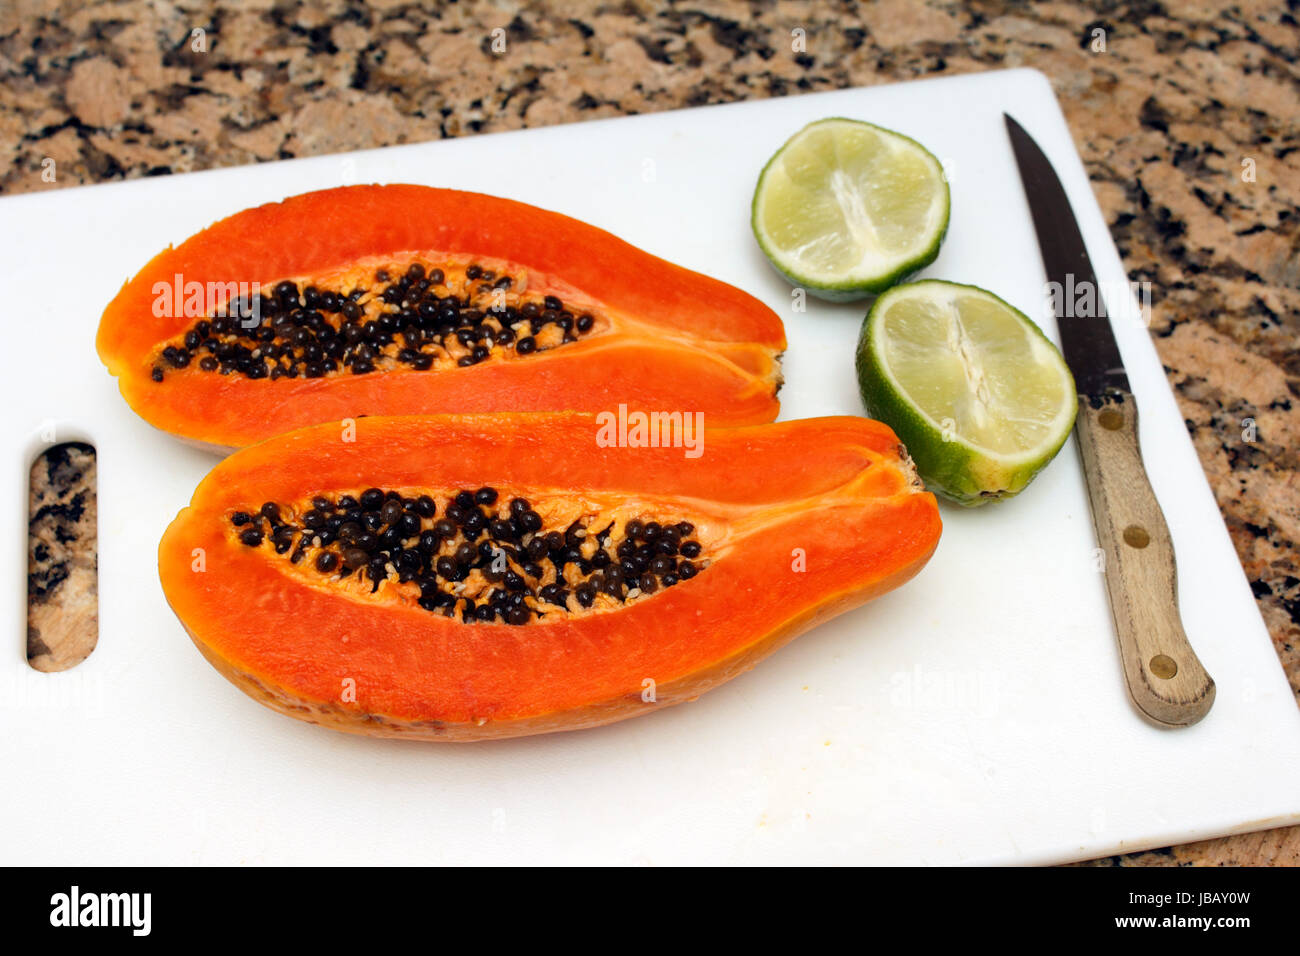 One large dark orange papaya fruit cut in half lengthwise with black seeds  inside next to two halves of a lime on a white cutting board near a knife  on a brown